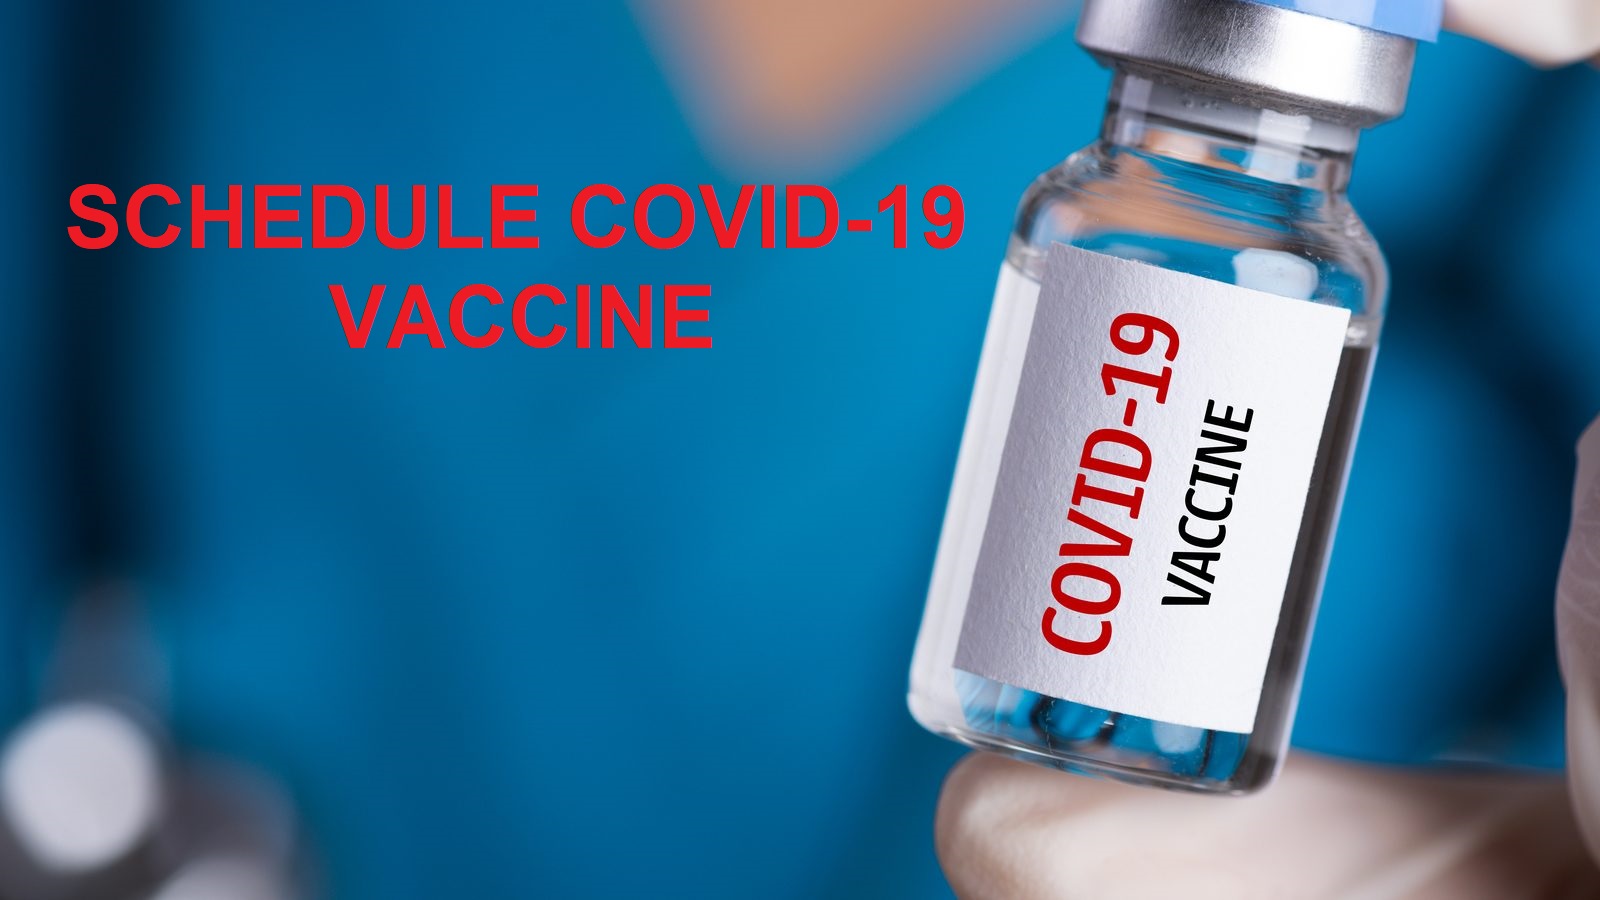 COVID-19 Vaccine Available